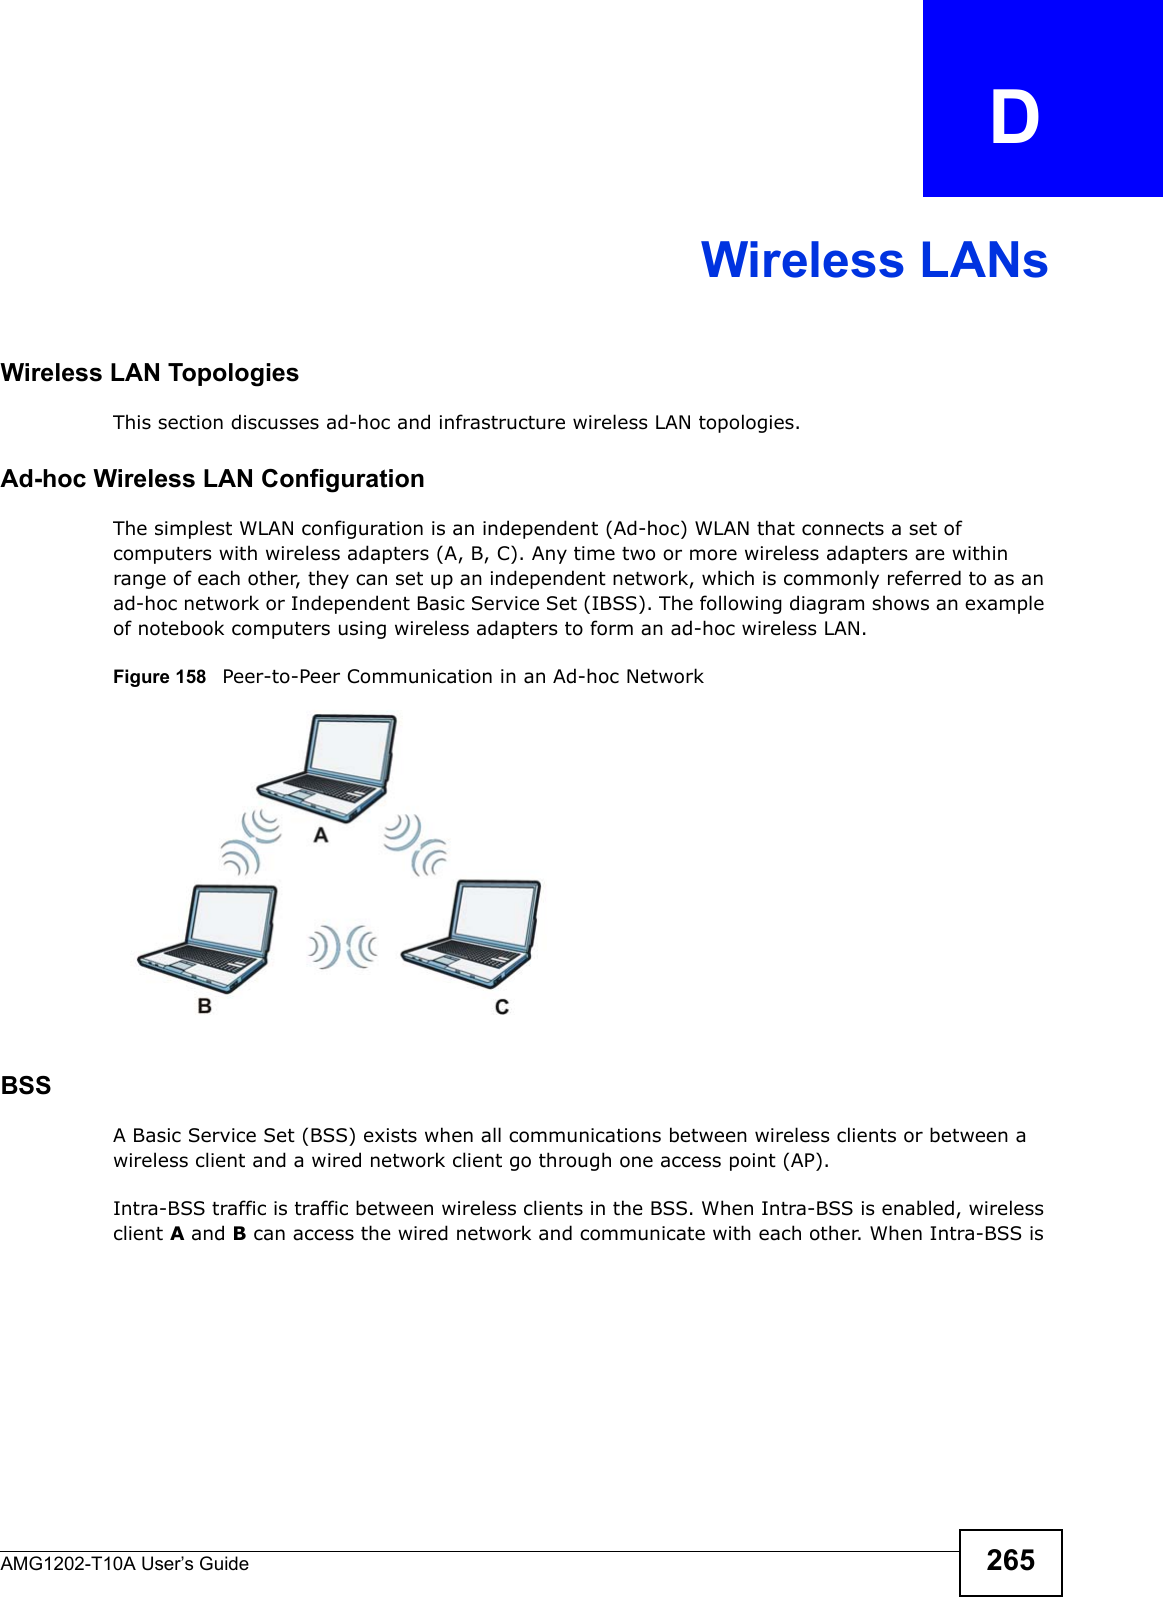 AMG1202-T10A User’s Guide 265APPENDIX   DWireless LANsWireless LAN TopologiesThis section discusses ad-hoc and infrastructure wireless LAN topologies.Ad-hoc Wireless LAN ConfigurationThe simplest WLAN configuration is an independent (Ad-hoc) WLAN that connects a set of computers with wireless adapters (A, B, C). Any time two or more wireless adapters are within range of each other, they can set up an independent network, which is commonly referred to as an ad-hoc network or Independent Basic Service Set (IBSS). The following diagram shows an example of notebook computers using wireless adapters to form an ad-hoc wireless LAN. Figure 158   Peer-to-Peer Communication in an Ad-hoc NetworkBSSA Basic Service Set (BSS) exists when all communications between wireless clients or between a wireless client and a wired network client go through one access point (AP). Intra-BSS traffic is traffic between wireless clients in the BSS. When Intra-BSS is enabled, wireless client A and B can access the wired network and communicate with each other. When Intra-BSS is 